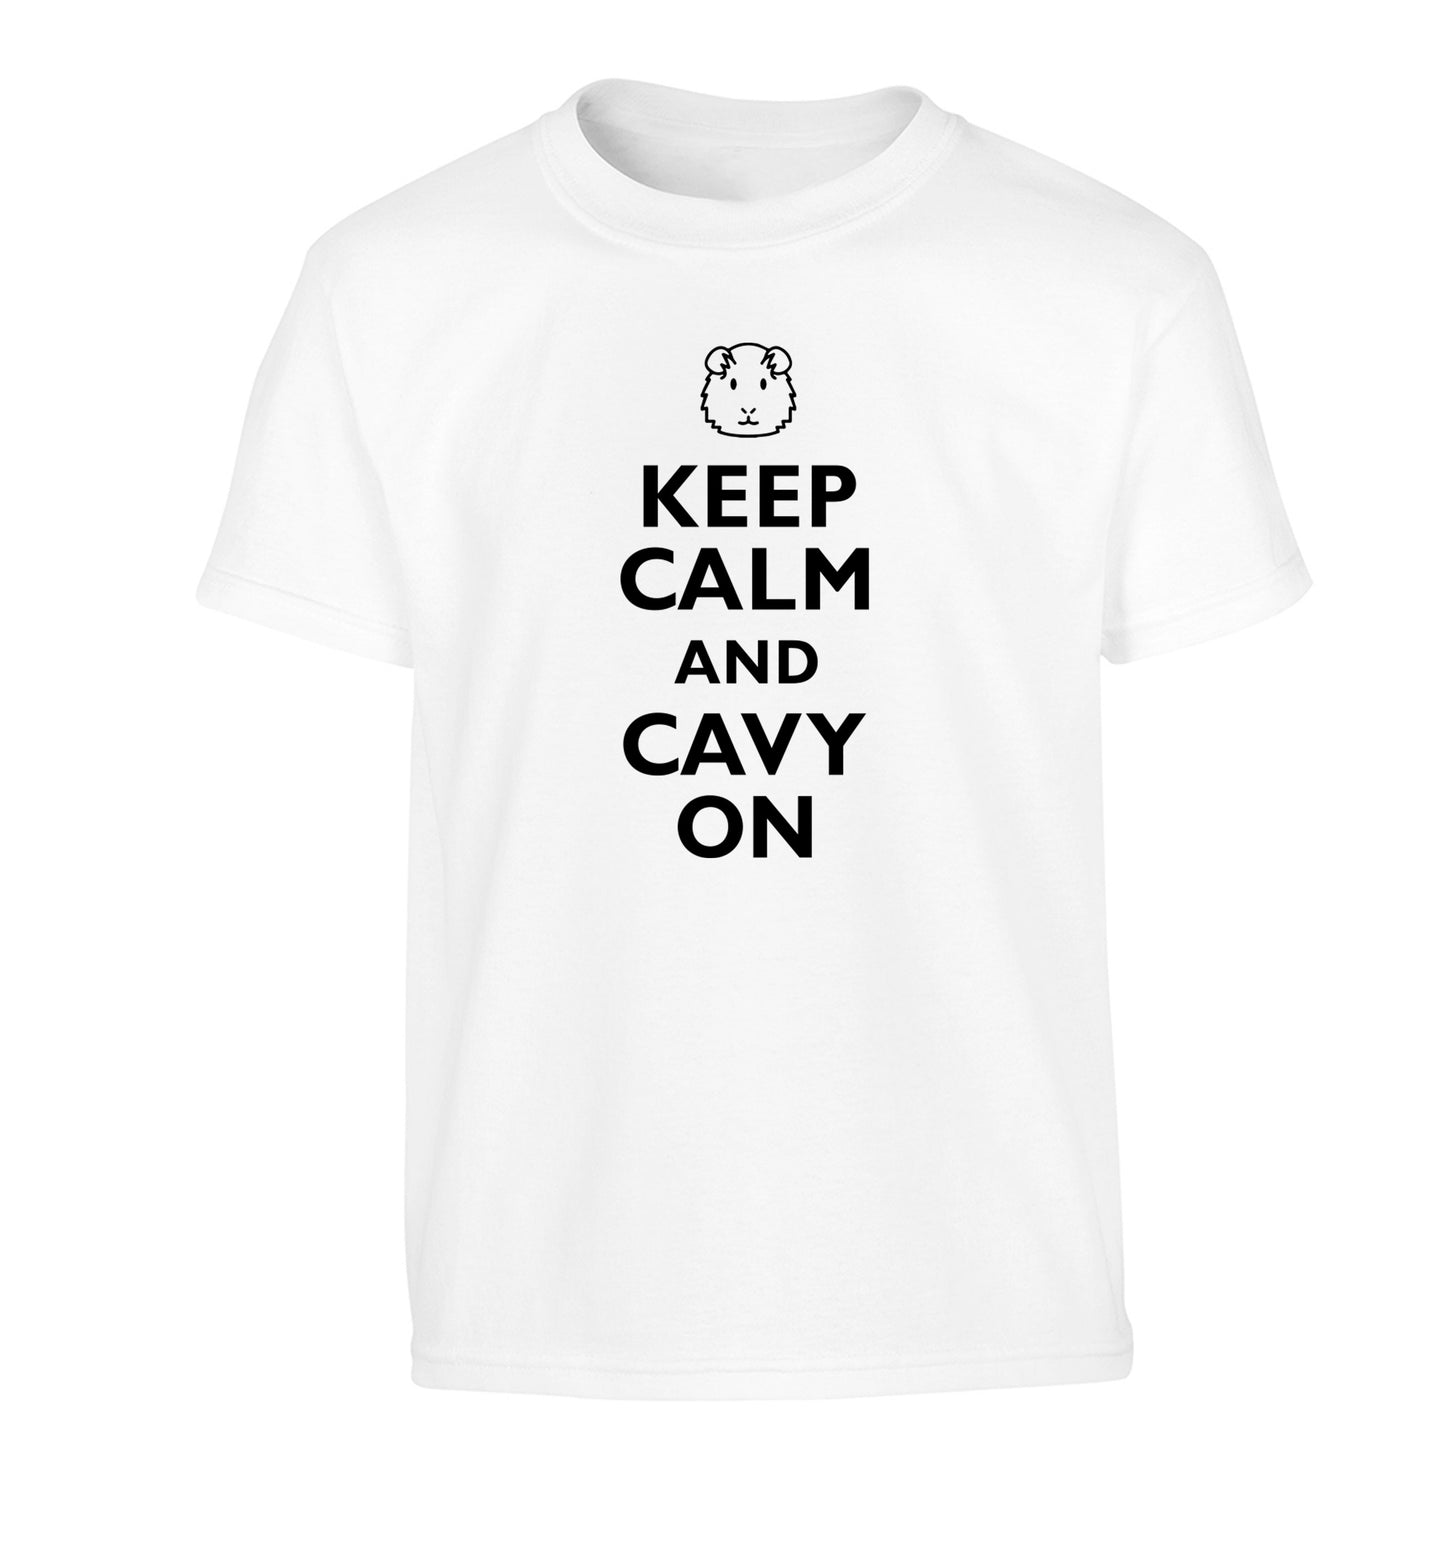 Keep calm and cavvy on Children's white Tshirt 12-14 Years